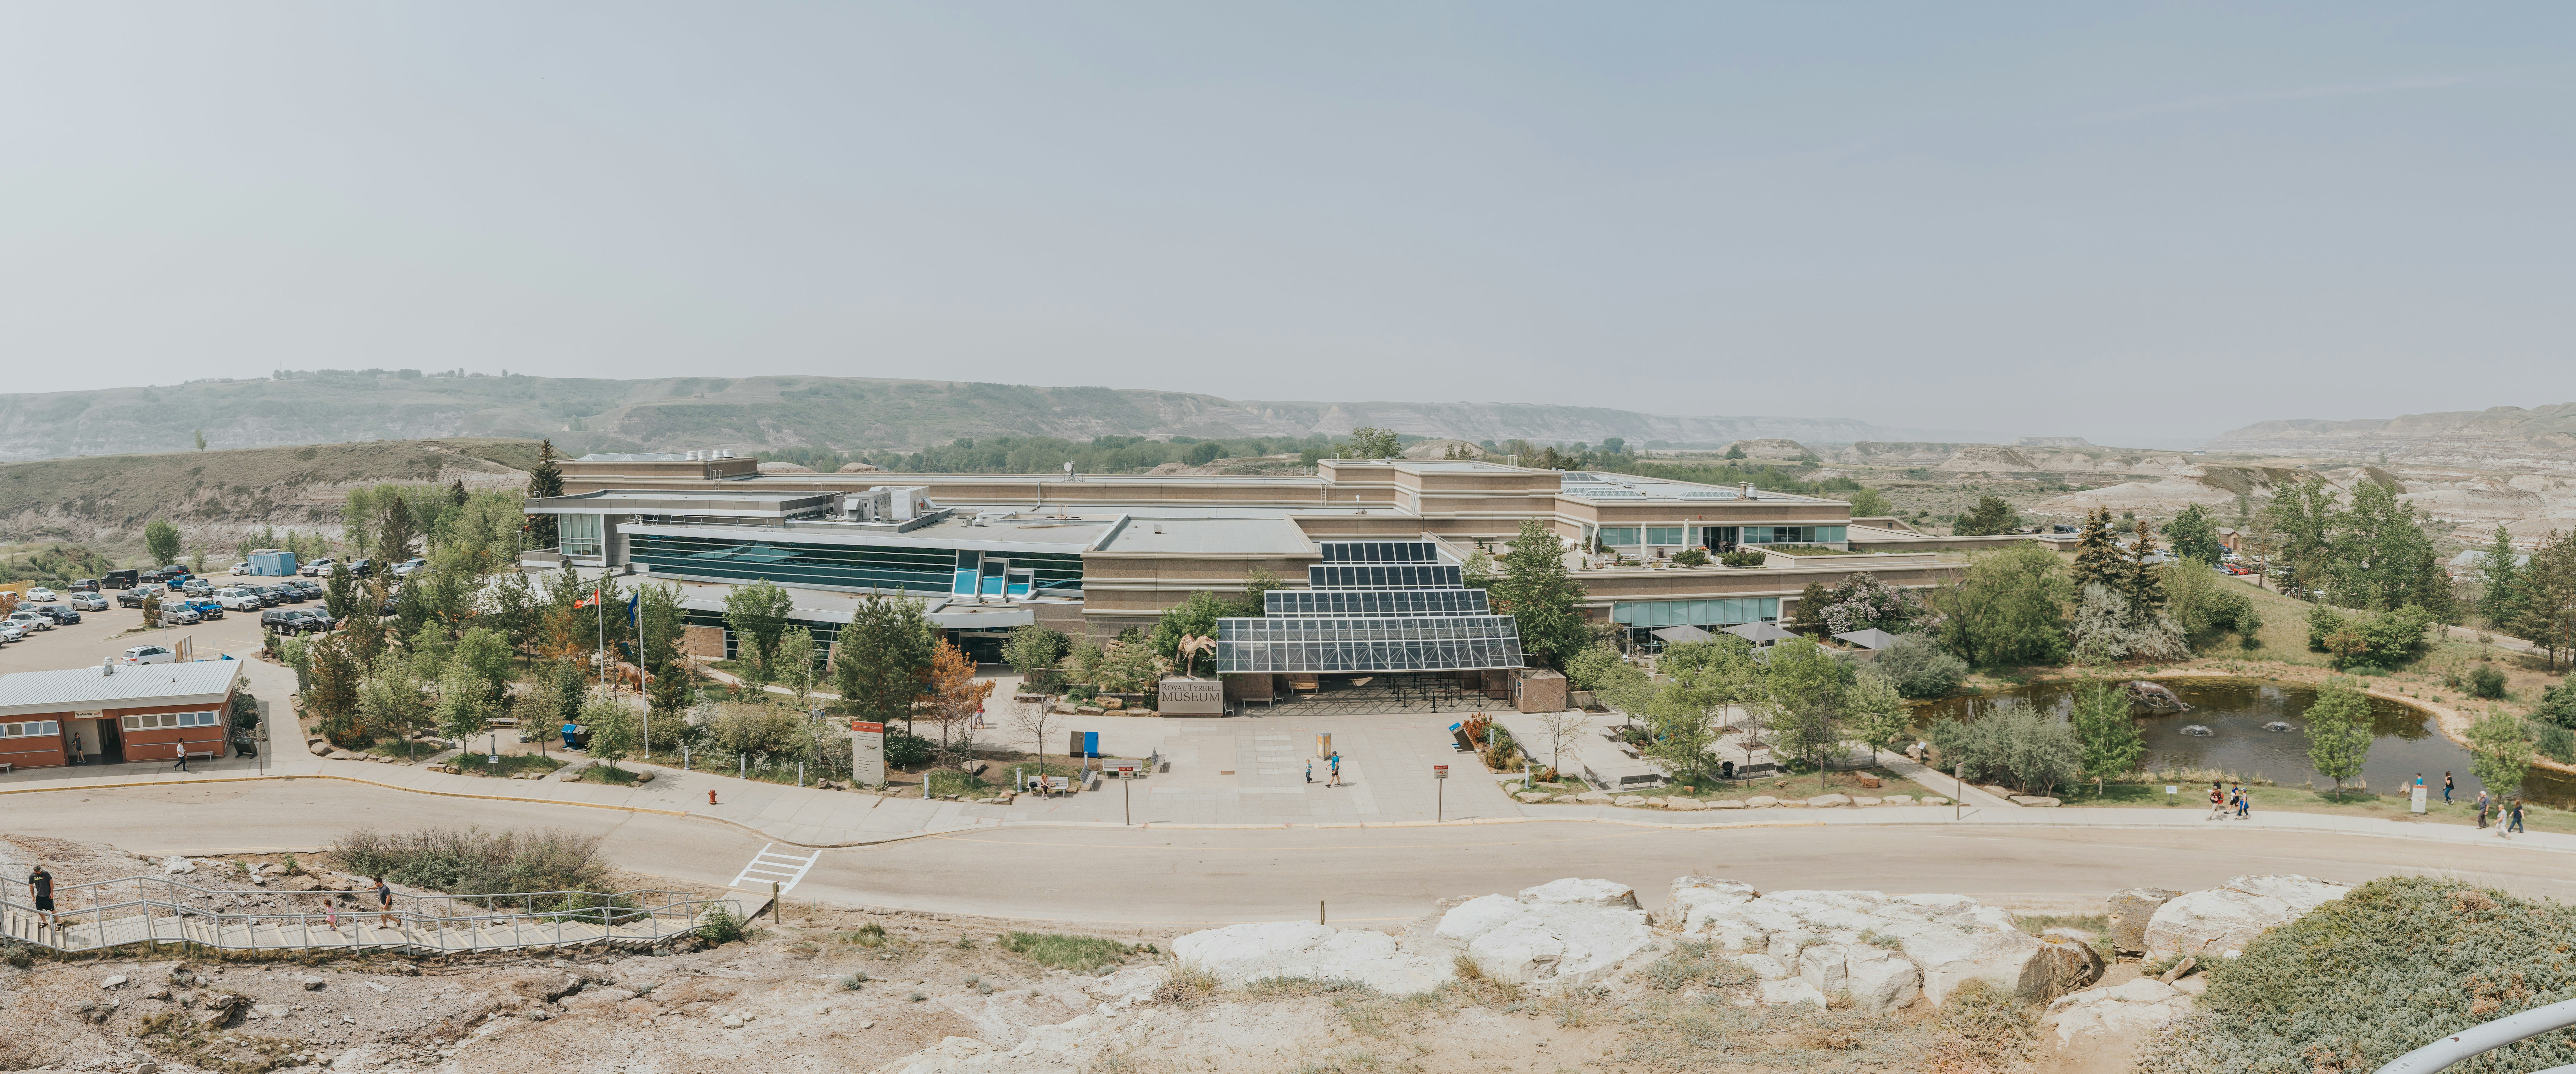 a panoramic shot of the Royal Tyrrell Museum of Palaeontology in Alberta